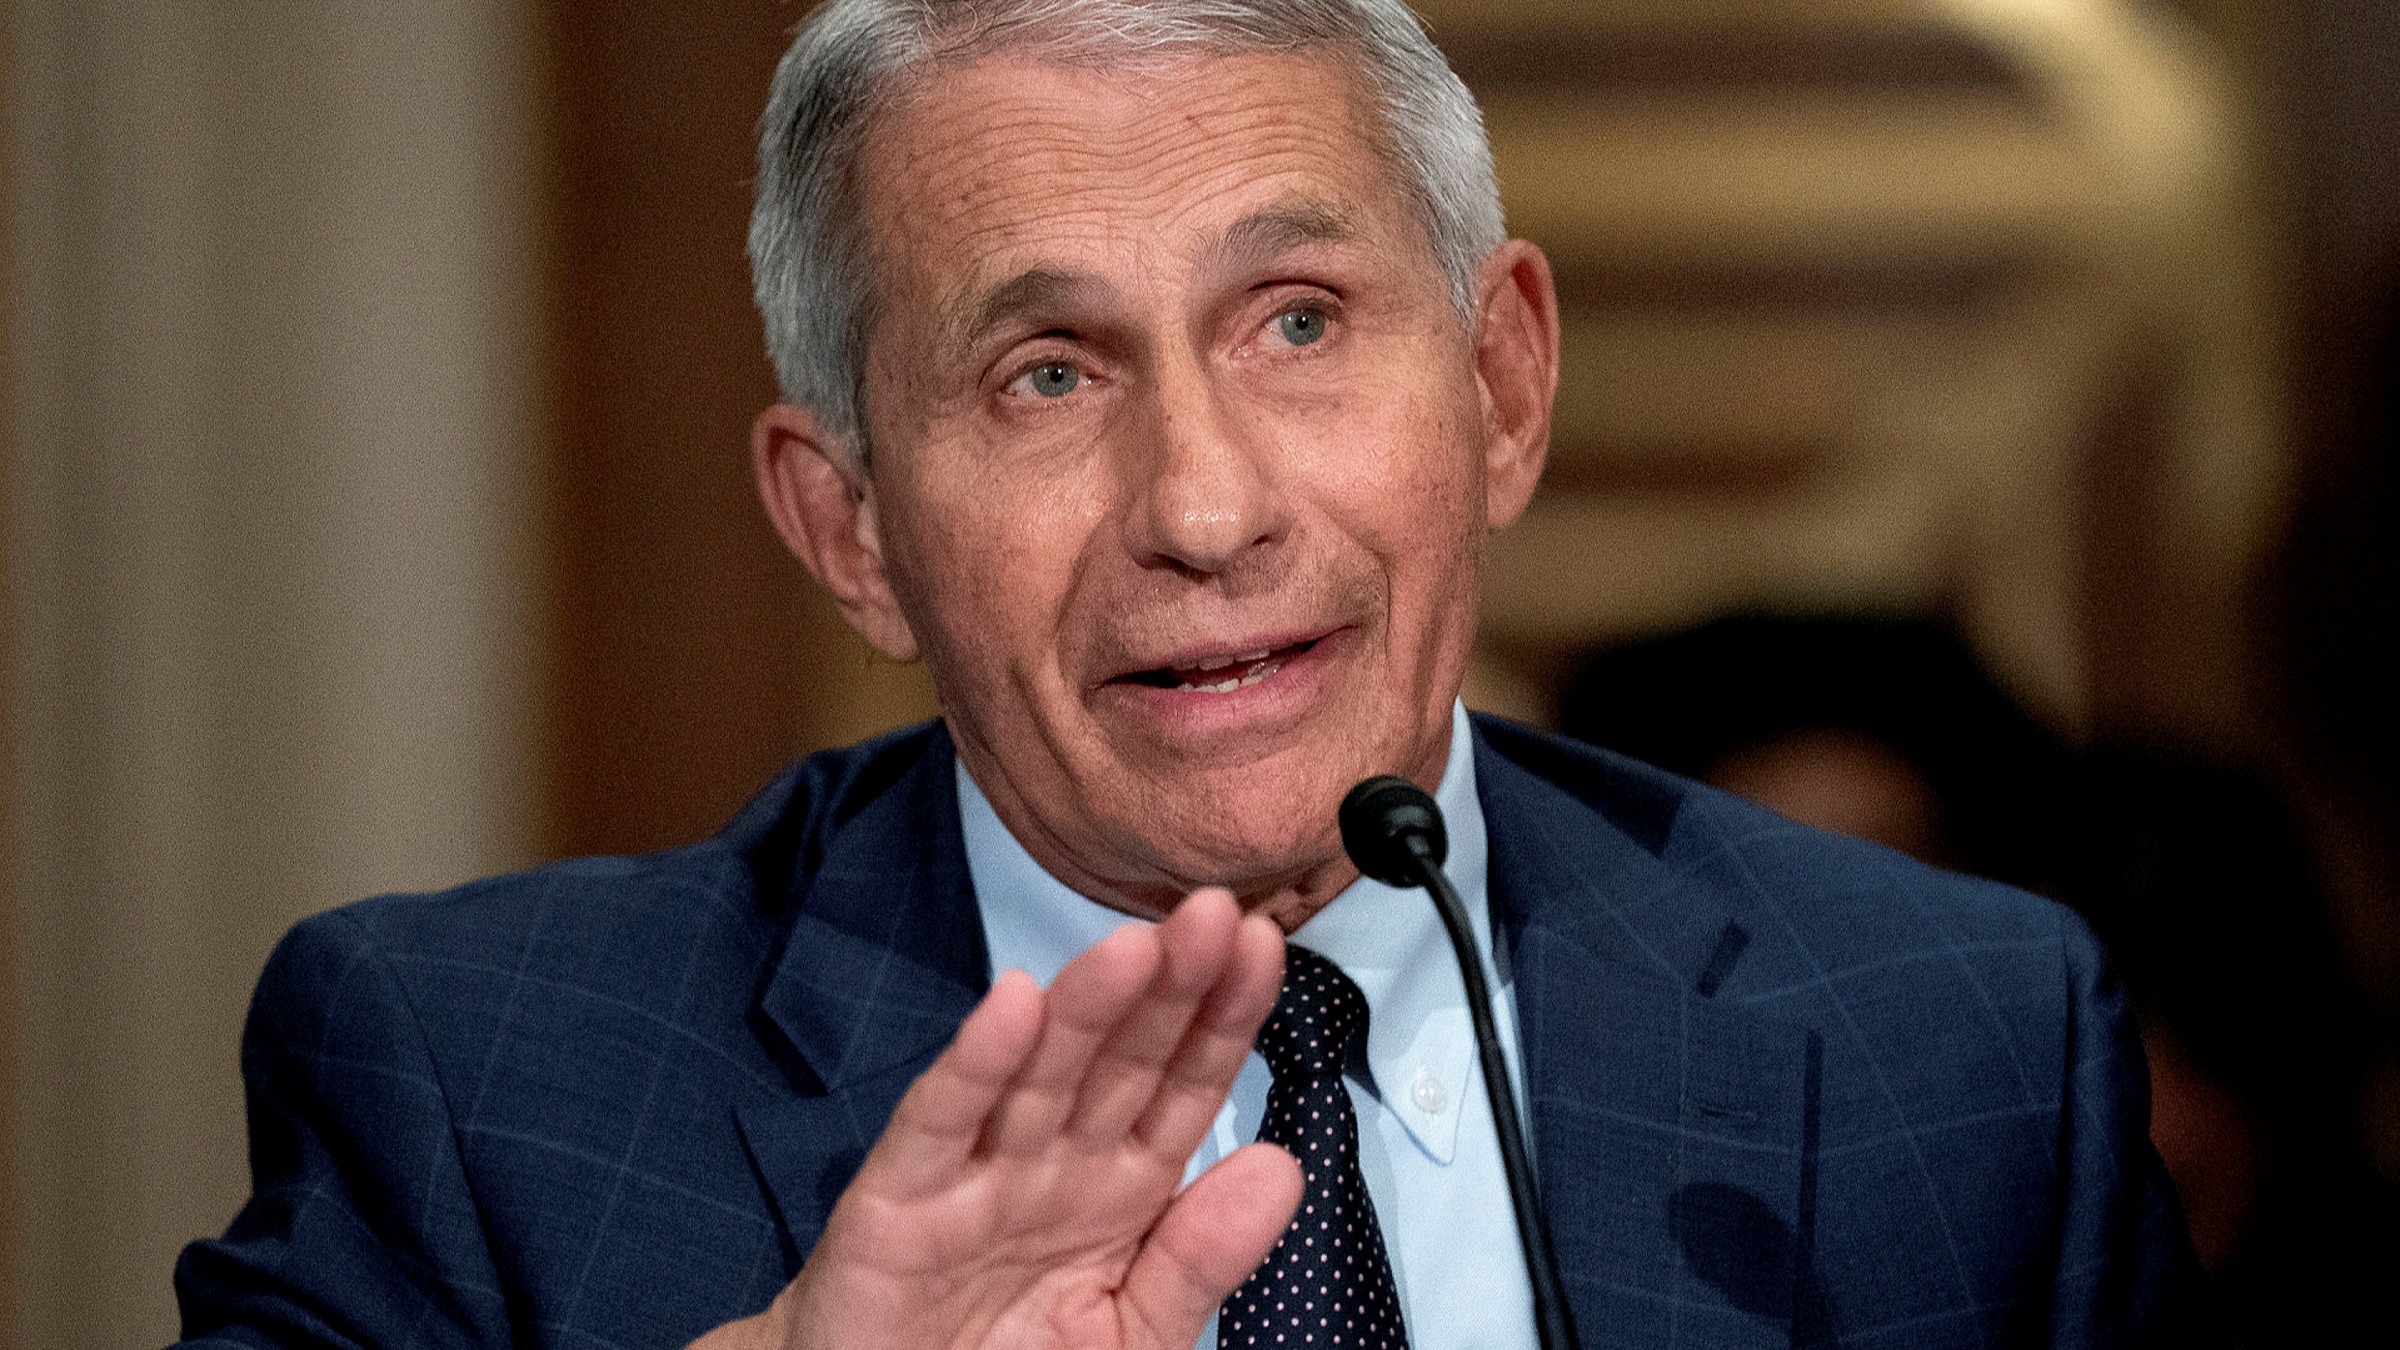 Coronavirus: Americans will 'likely' need a booster to be fully vaccinated,  Fauci says - as it happened | Financial Times